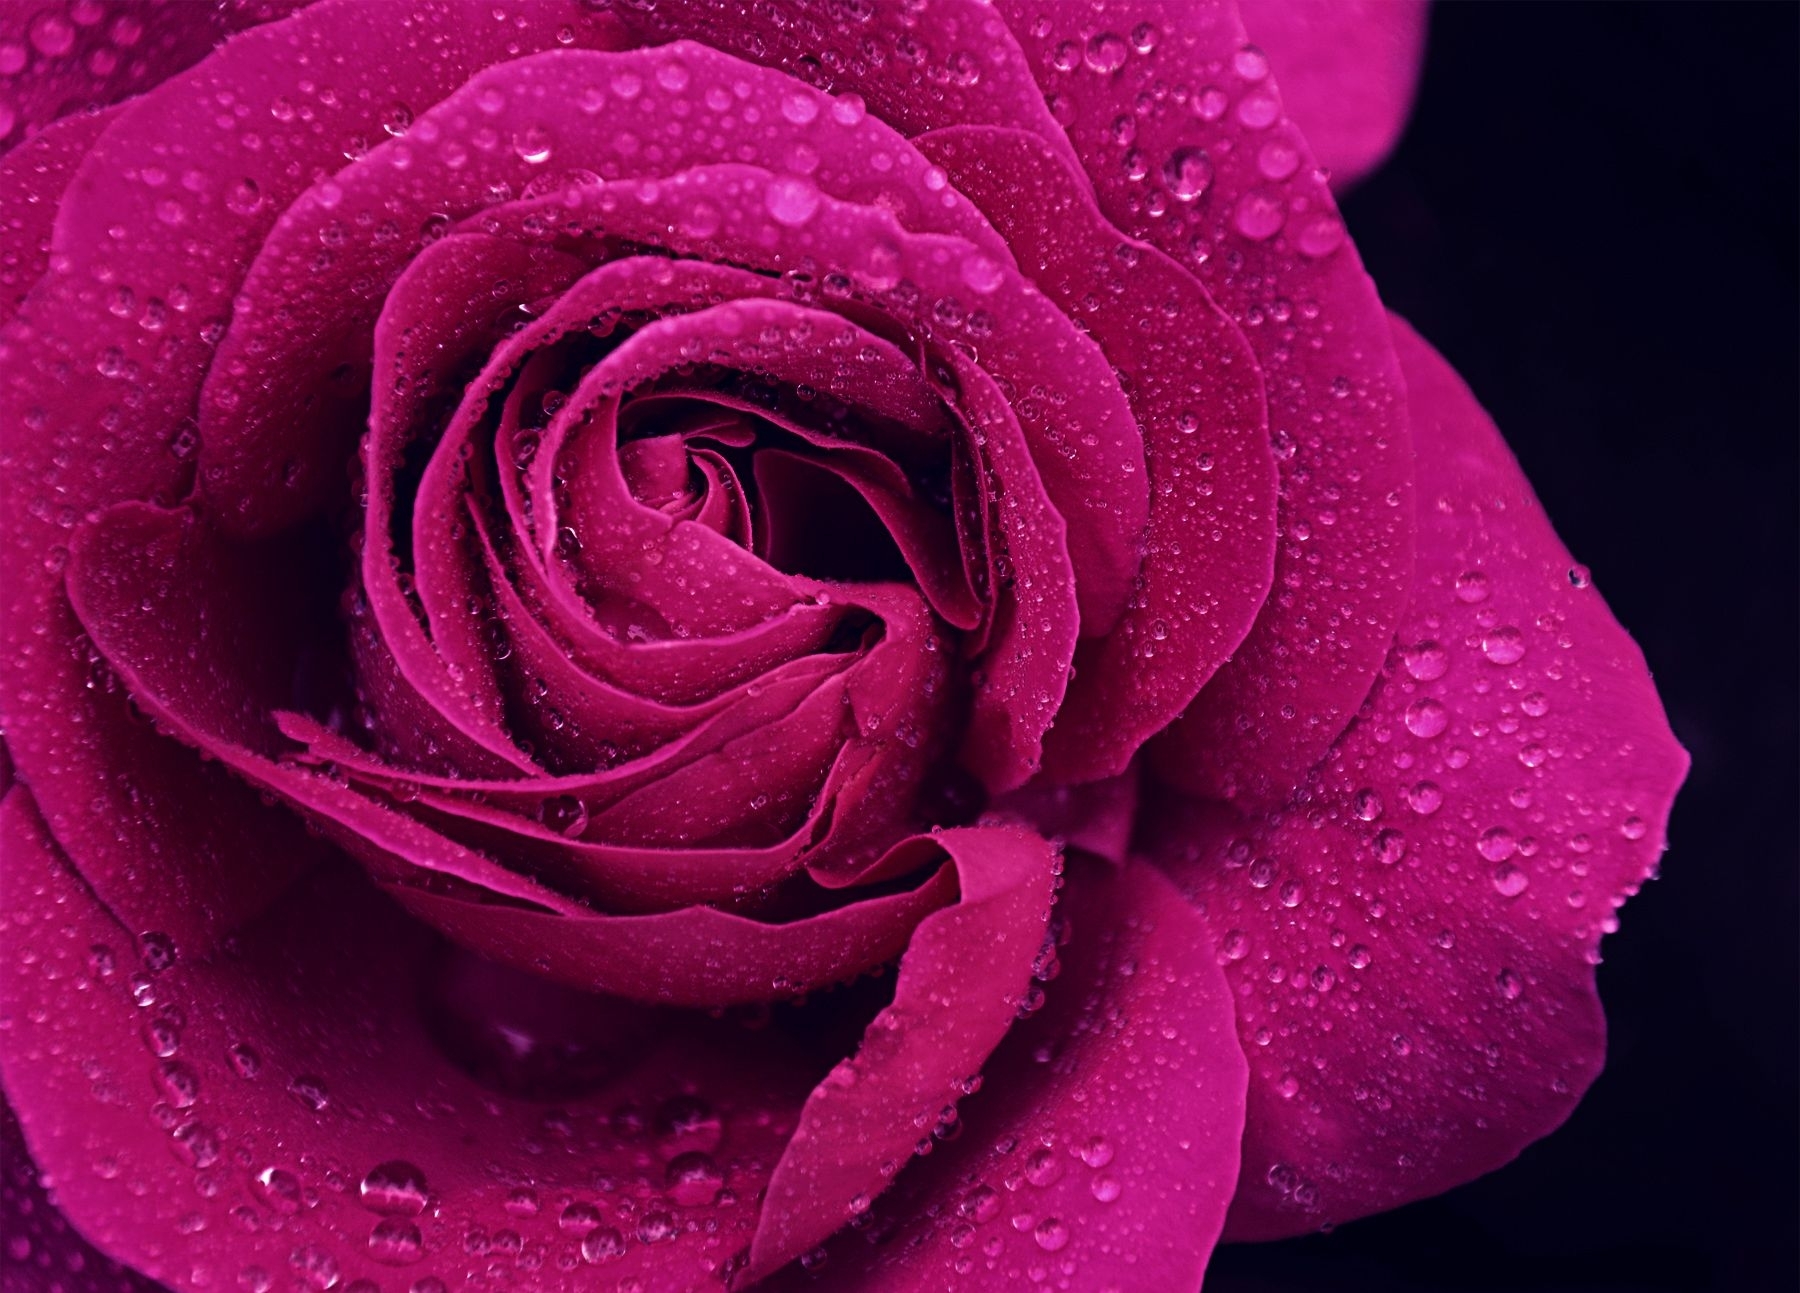 10 Top Pink And Purple Roses Wallpaper FULL HD 1920×1080 For PC Background